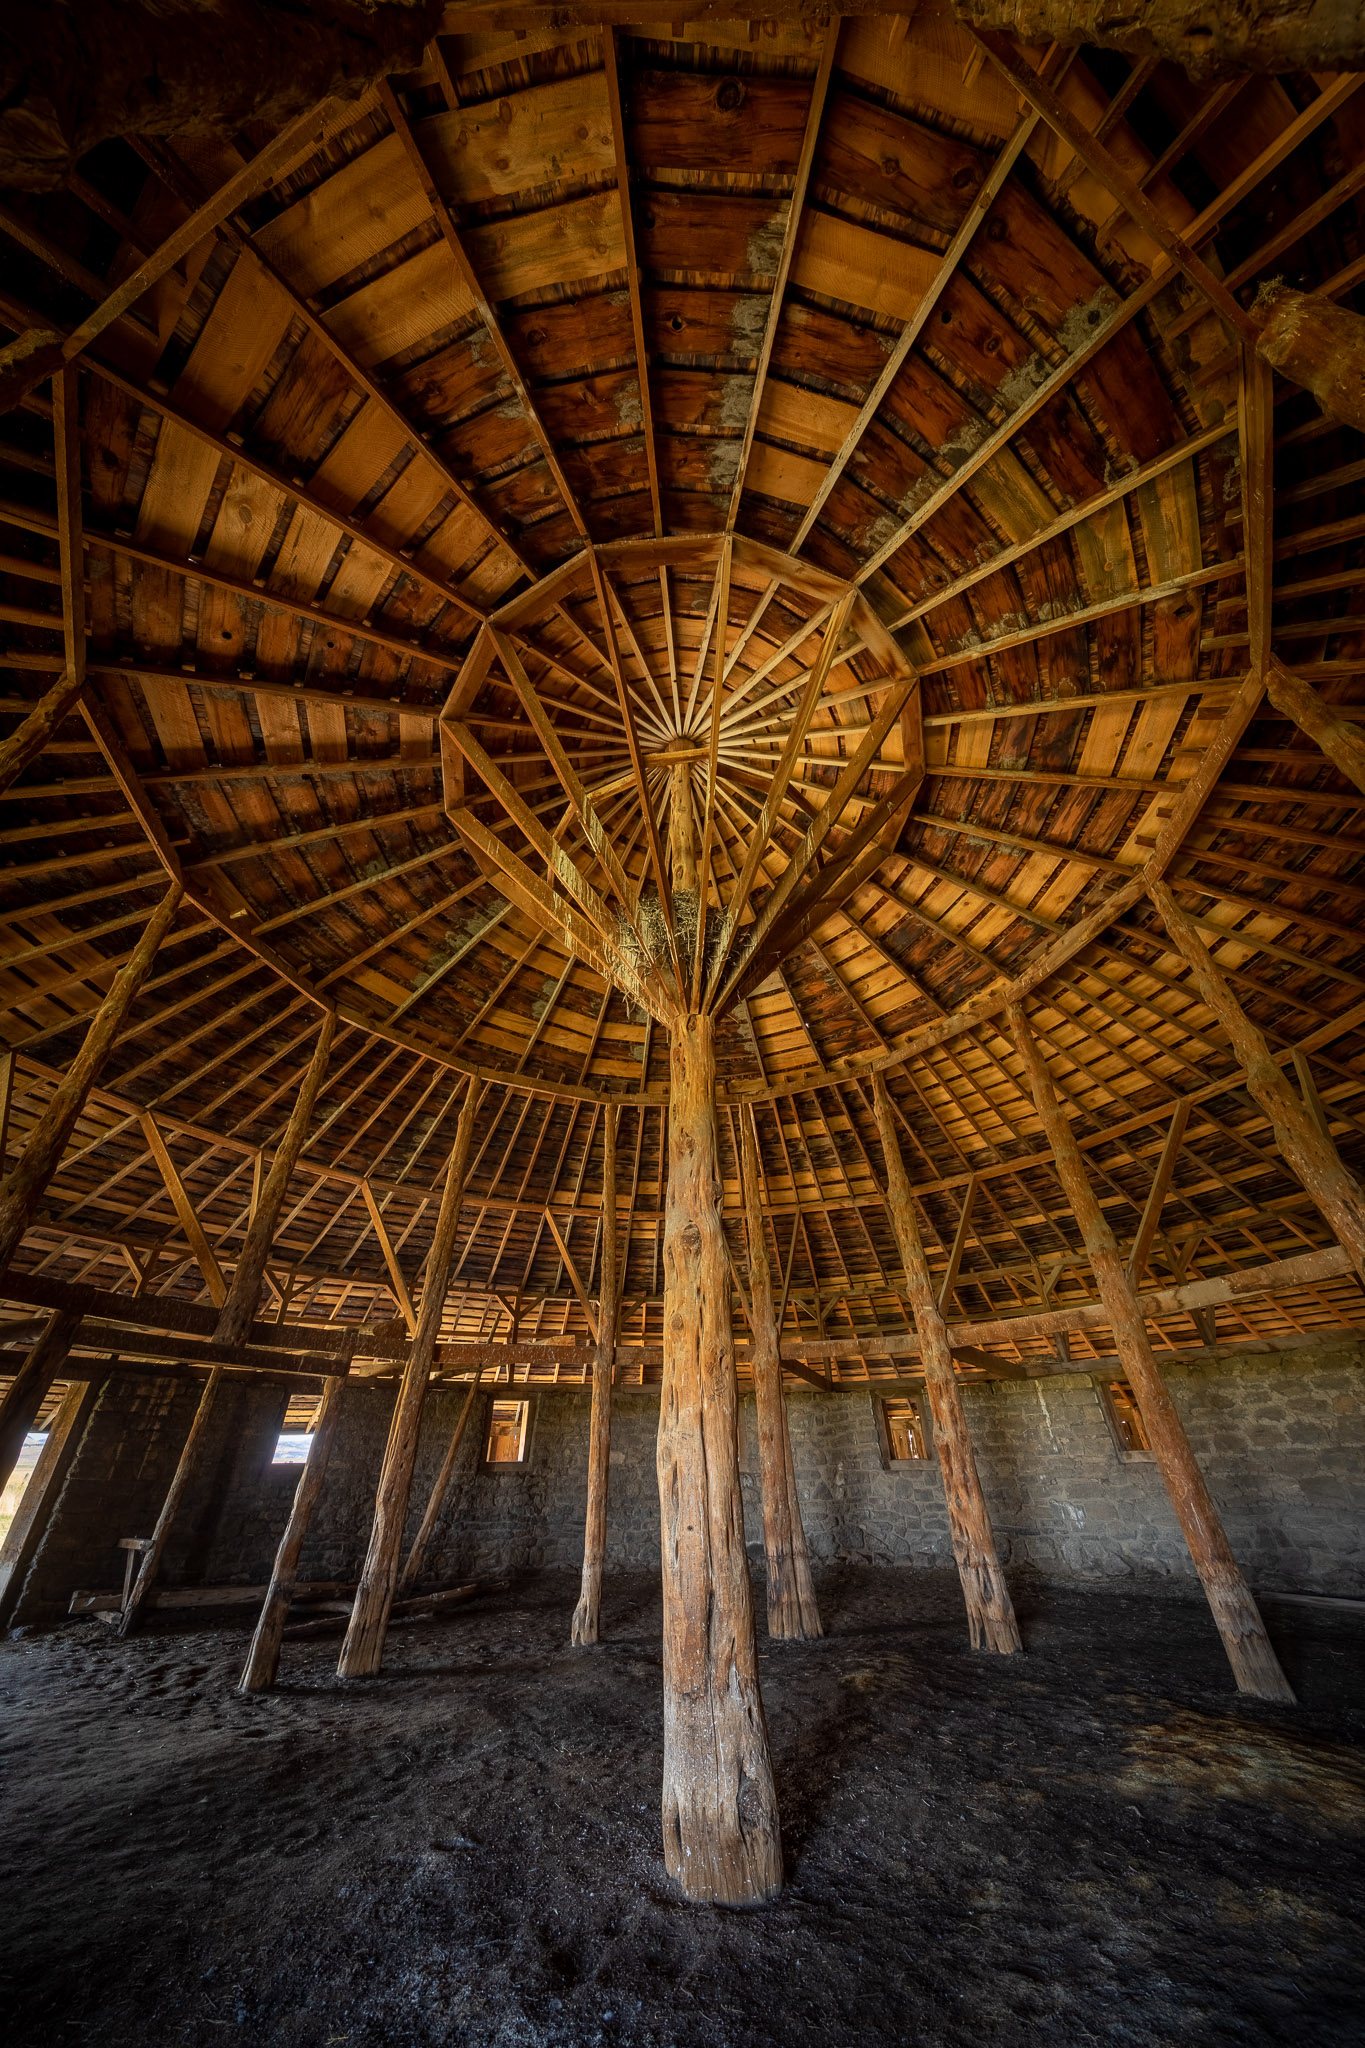 Pete French Round Barn